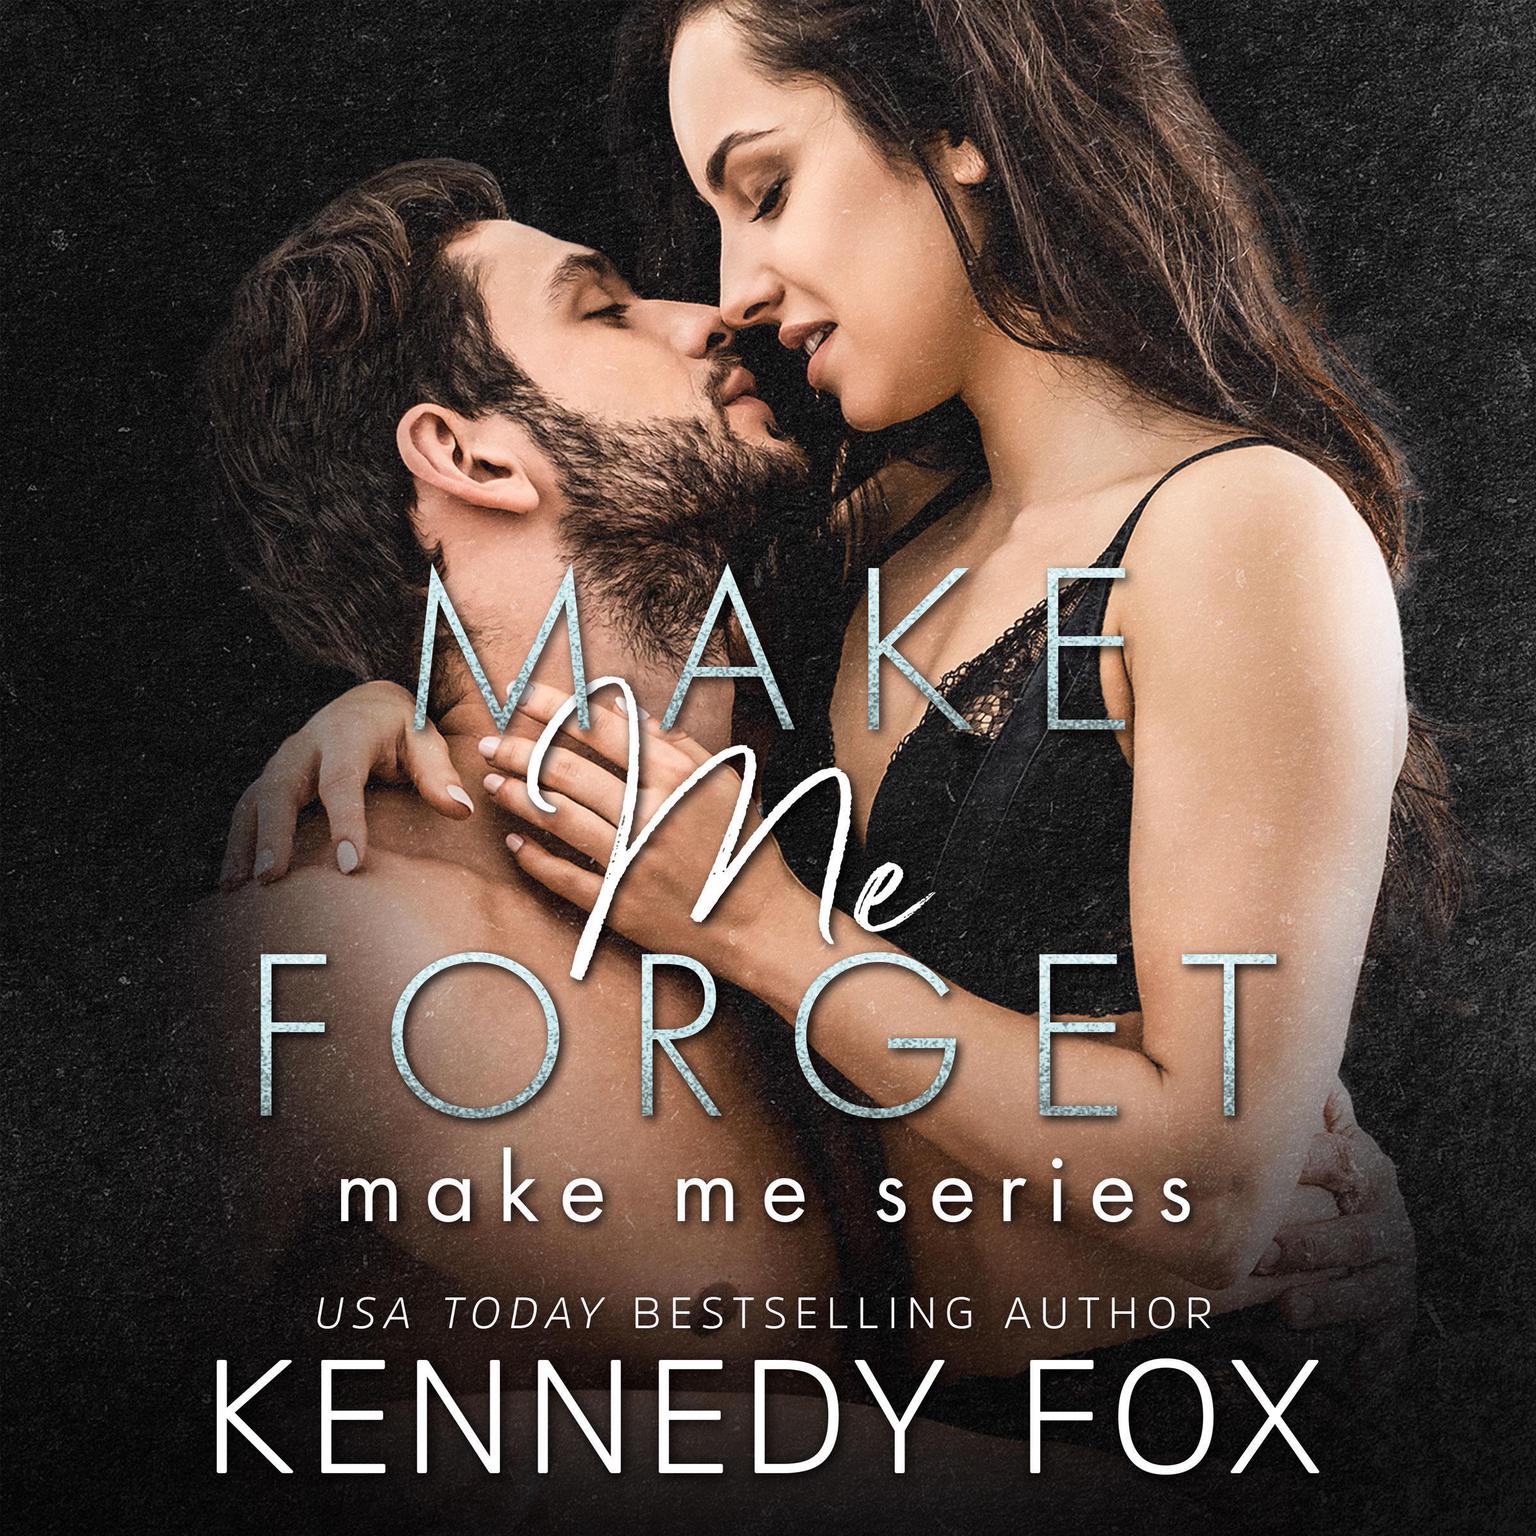 Make Me Forget (Make Me Series Book 1) Audiobook, by Kennedy Fox